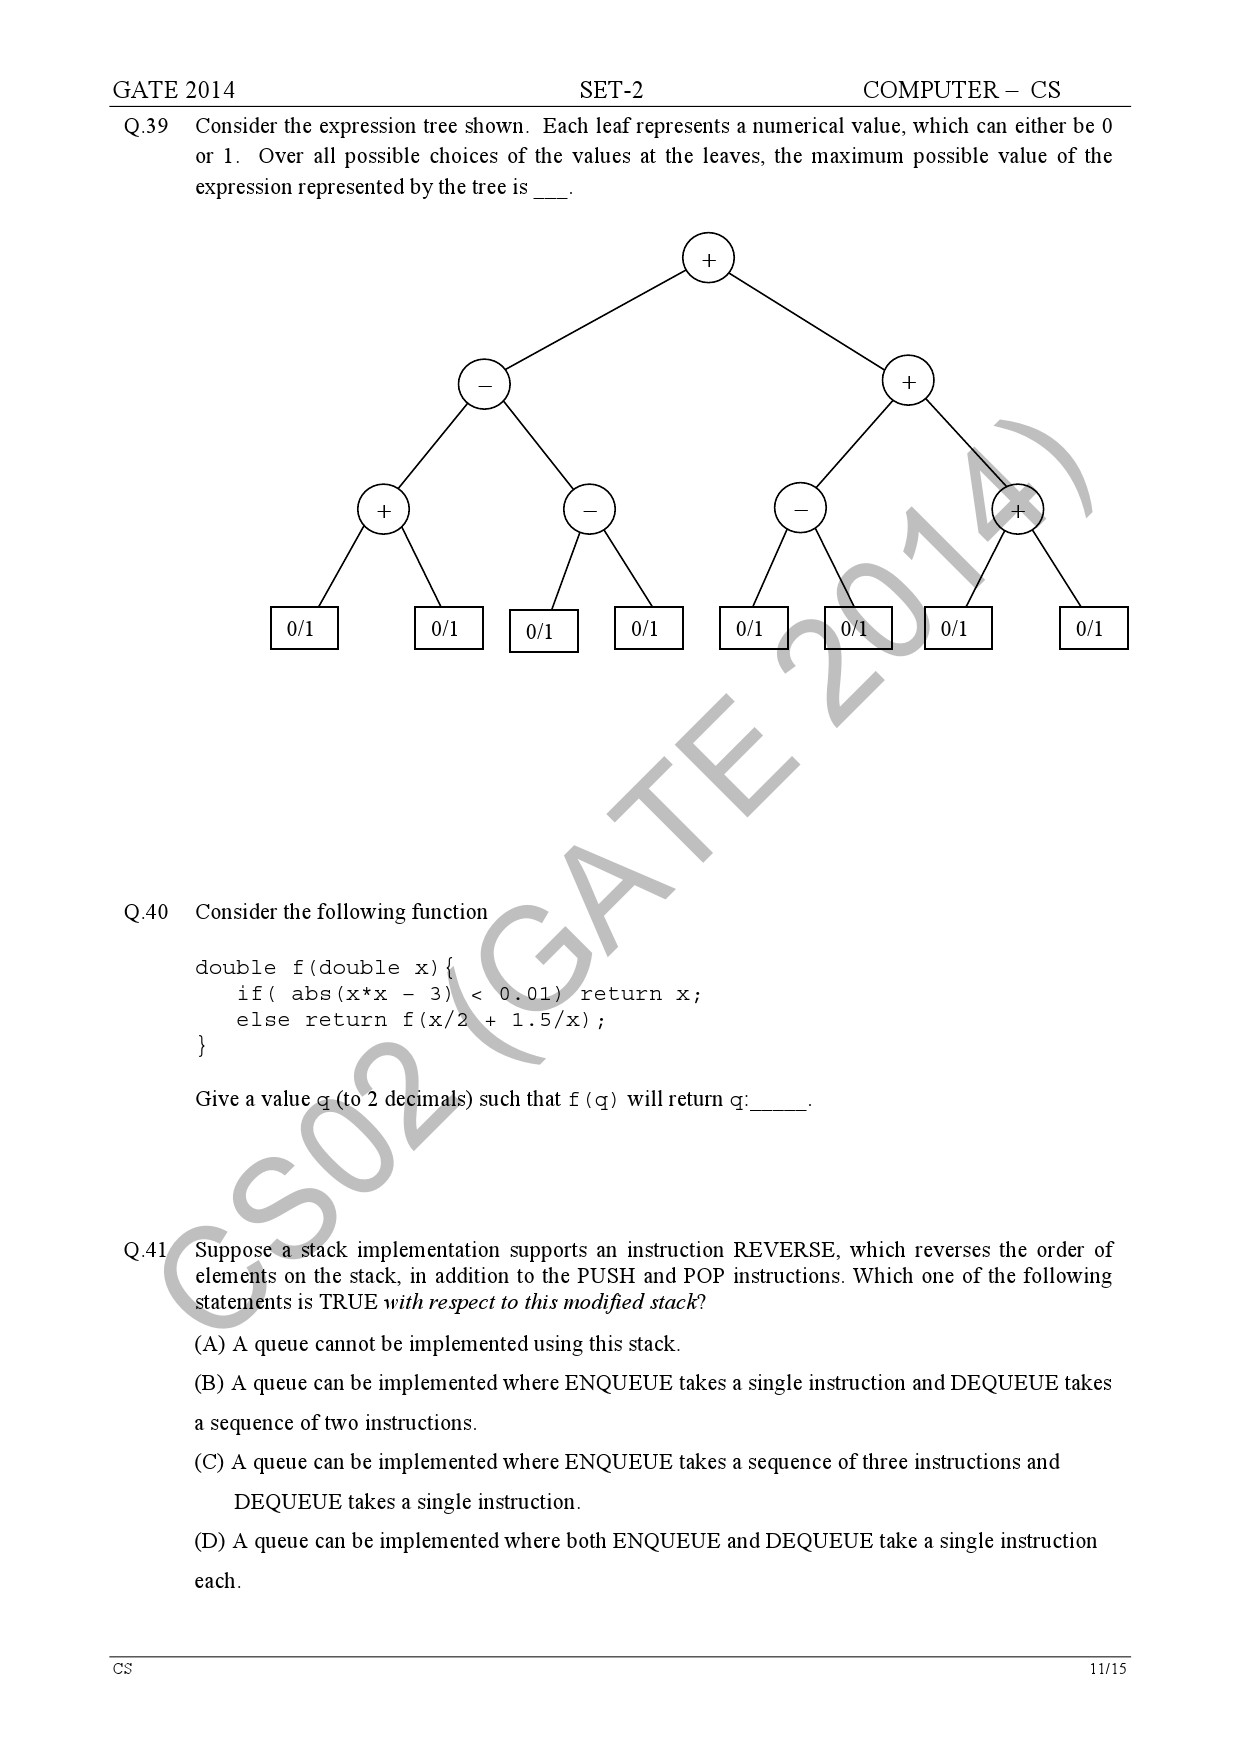 GATE Exam Question Paper 2014 Computer Science and Information Technology Set 2 17